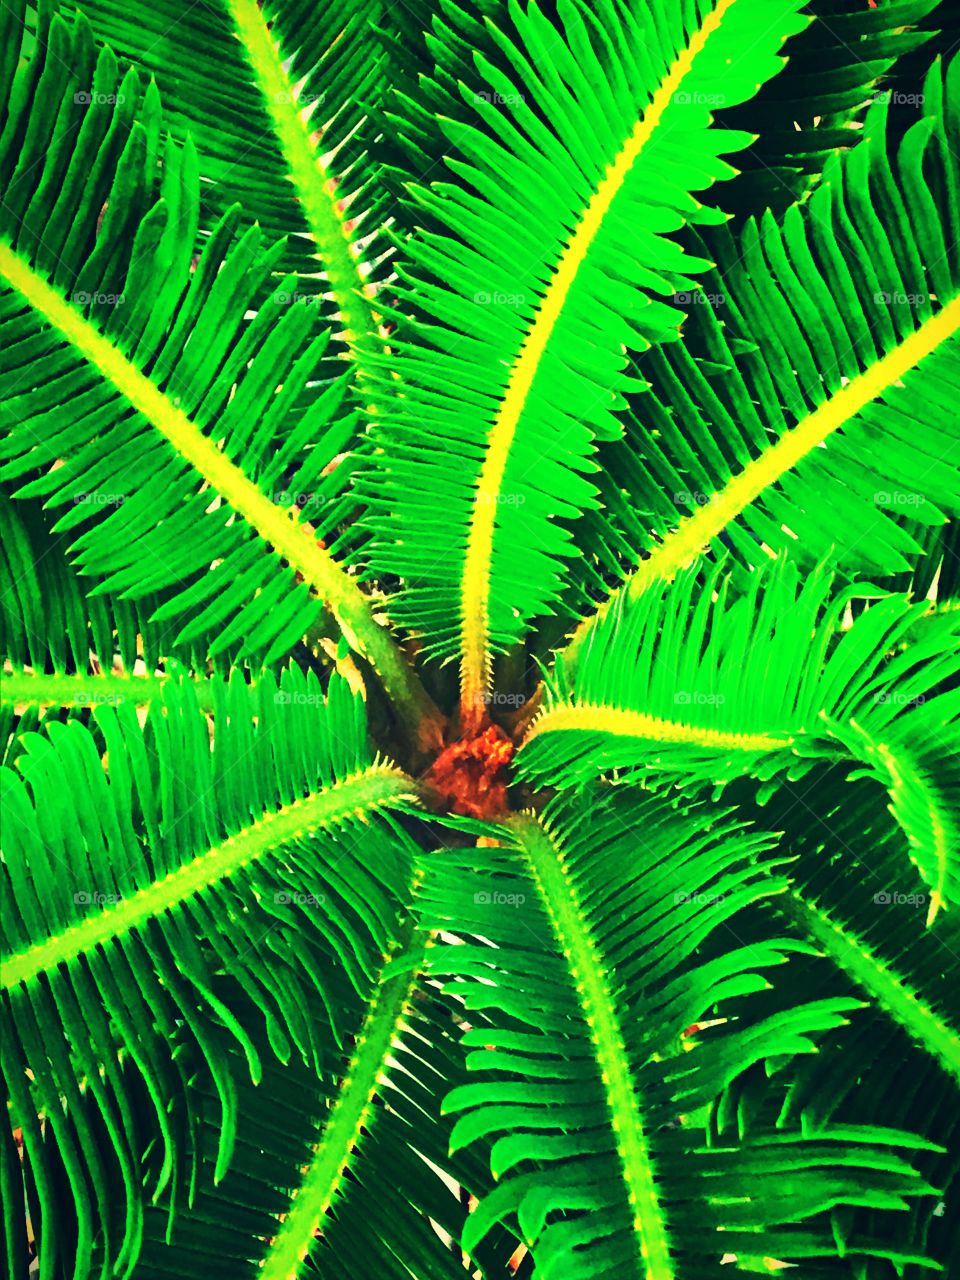 Patterned Vibrant green palm tree